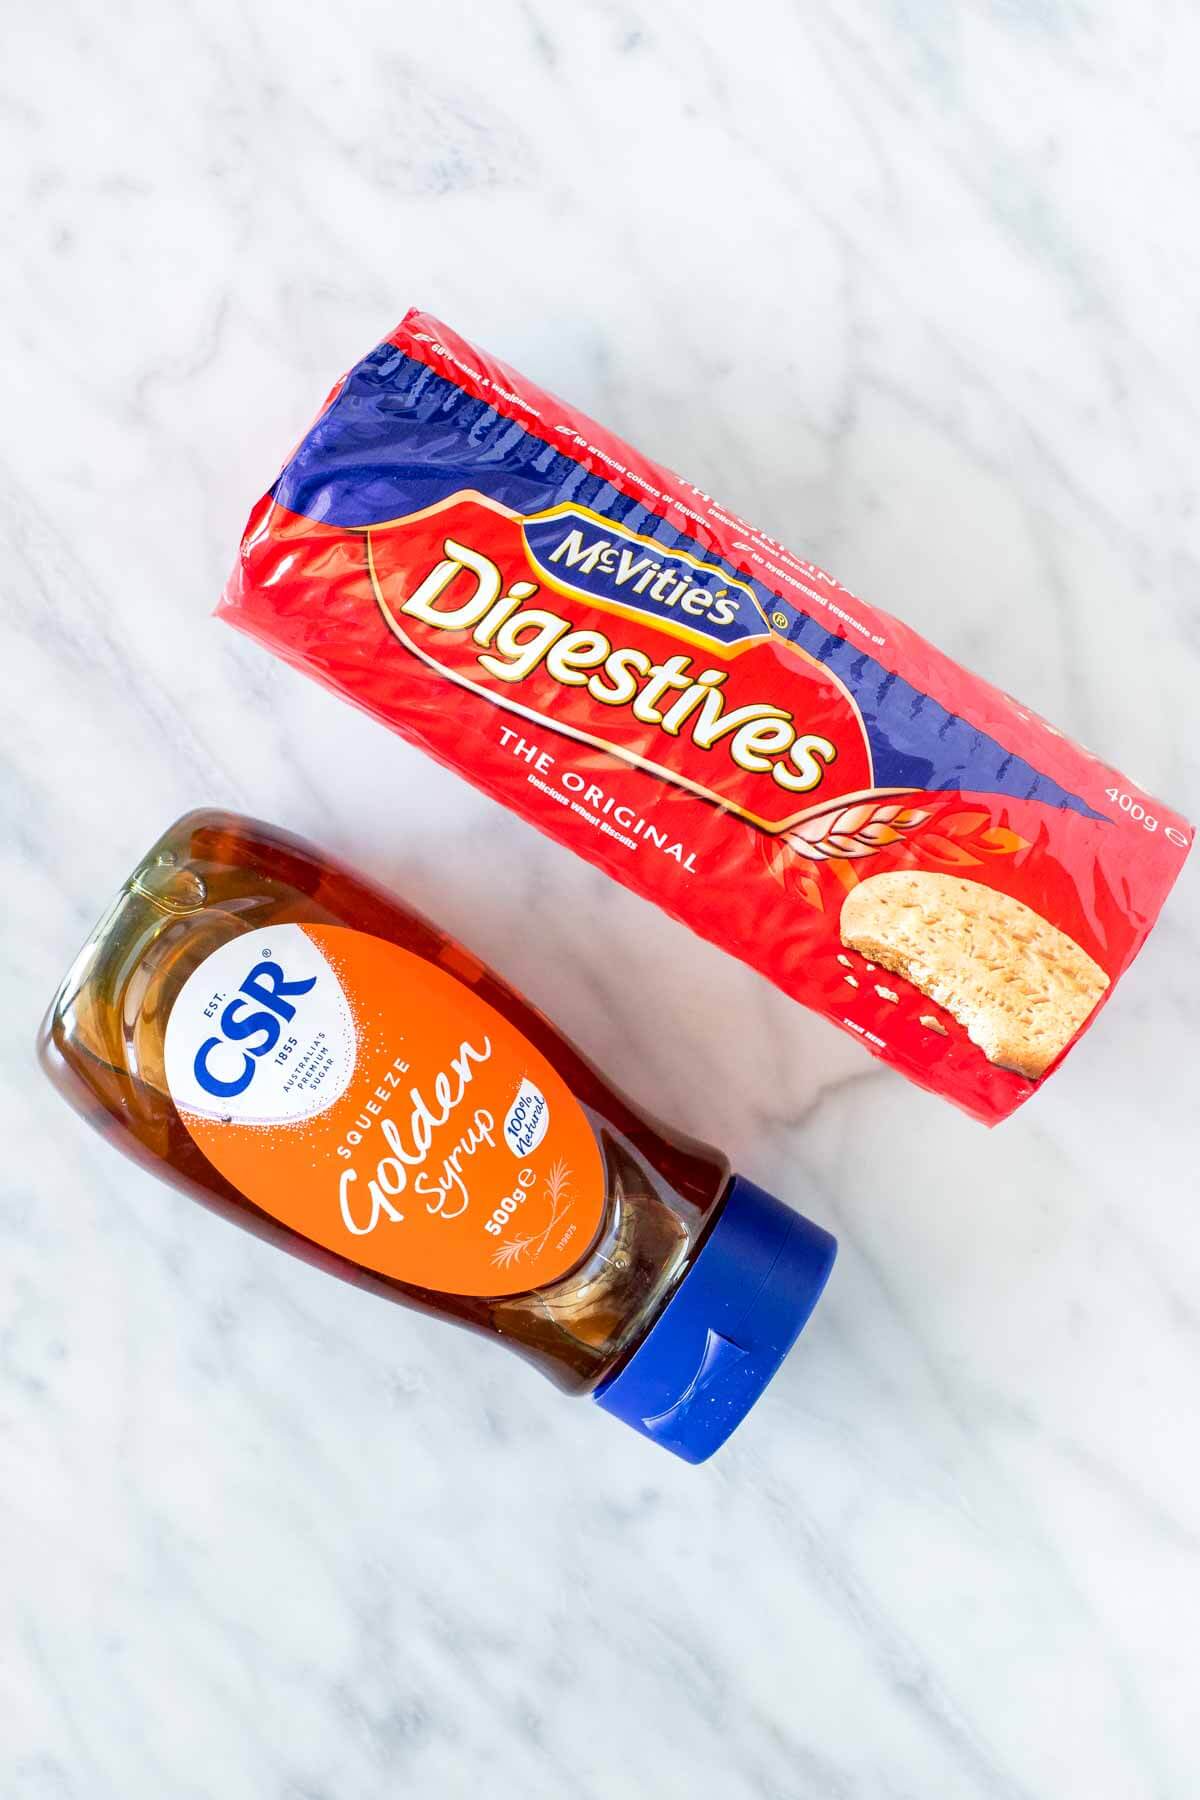 Digestive biscuits and golden syrup for making chocolate biscuit cake. 